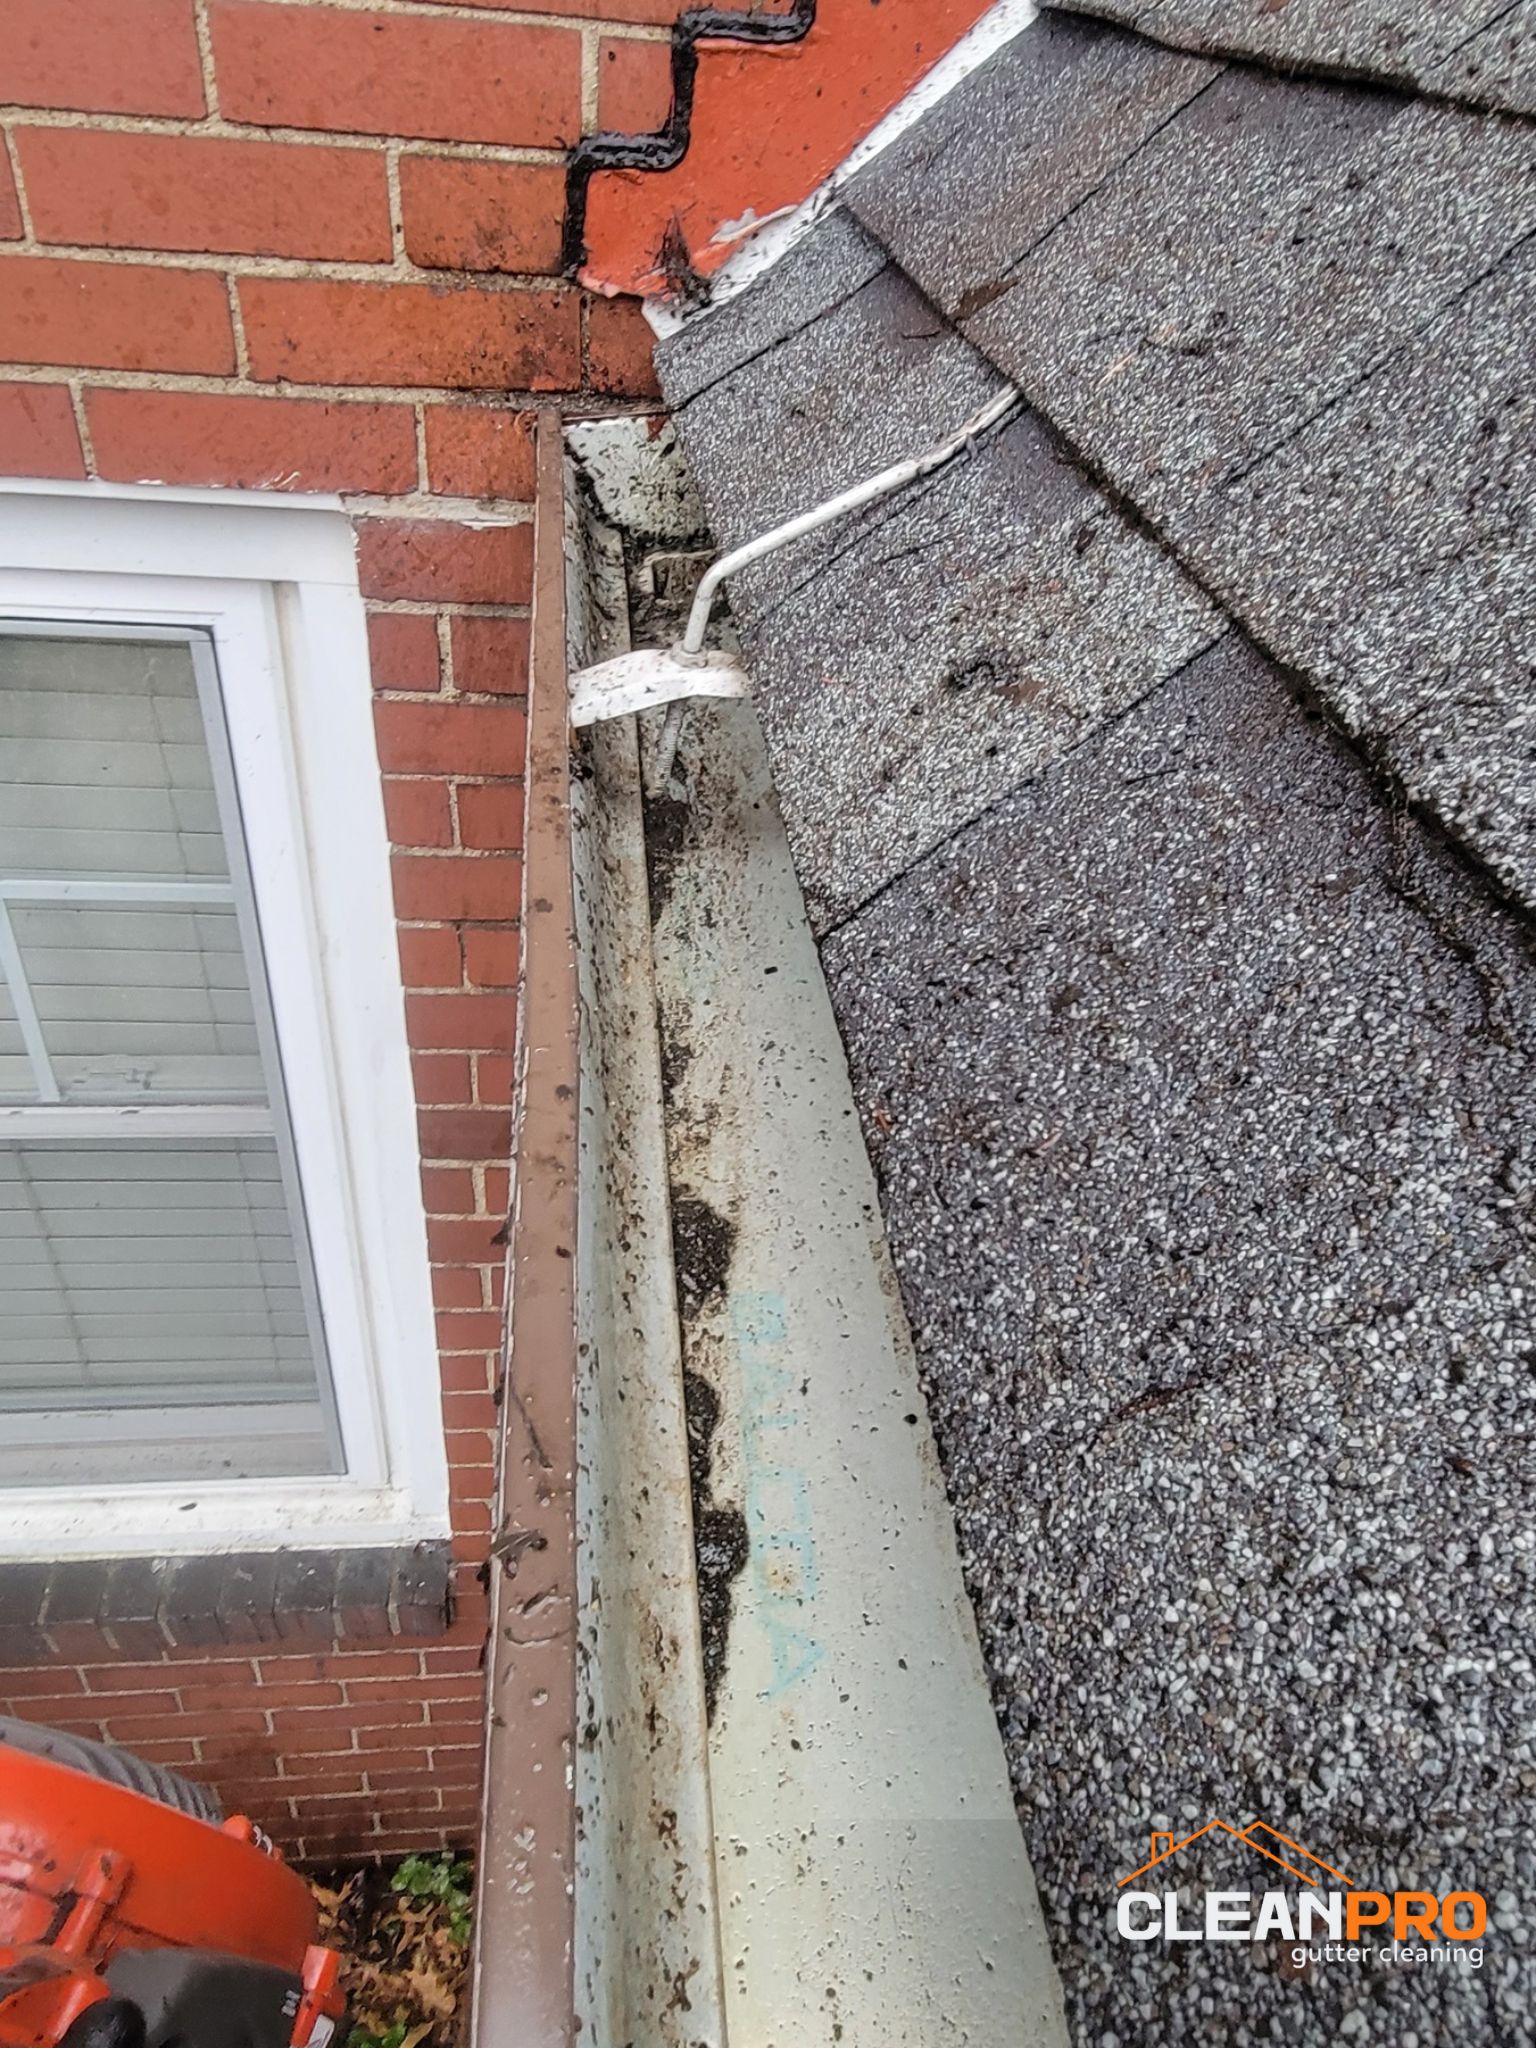 Local Gutter Cleaning in Virginia Beach